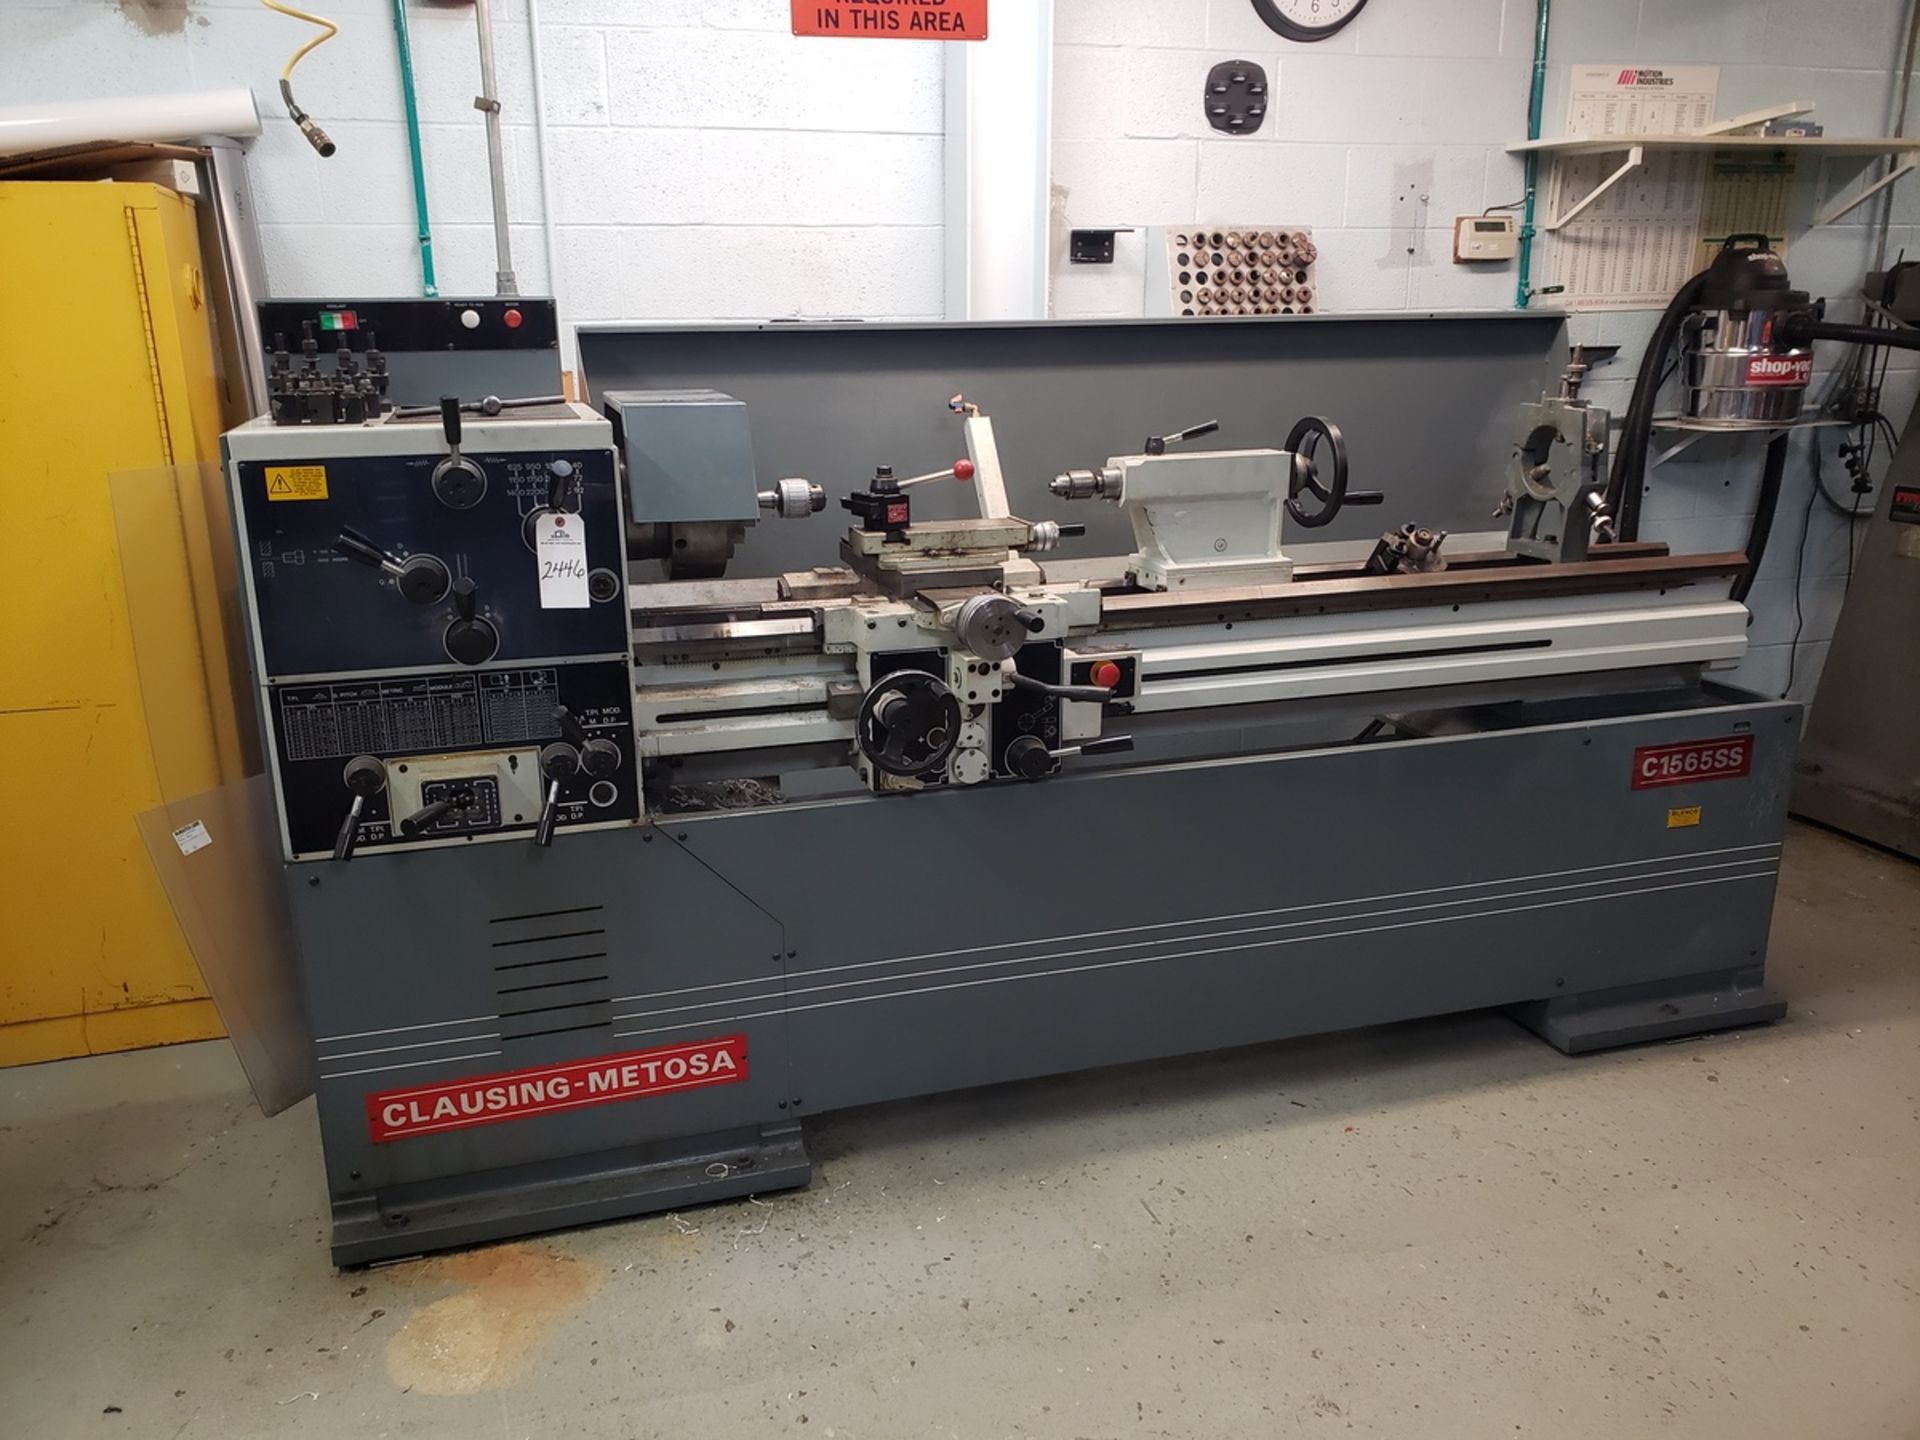 Clausing Metosa 17/24" X 72" Gap Bed Engine Lathe, M# C1565SS, S/N 41119, 2" Hole, A | Rig Fee $550